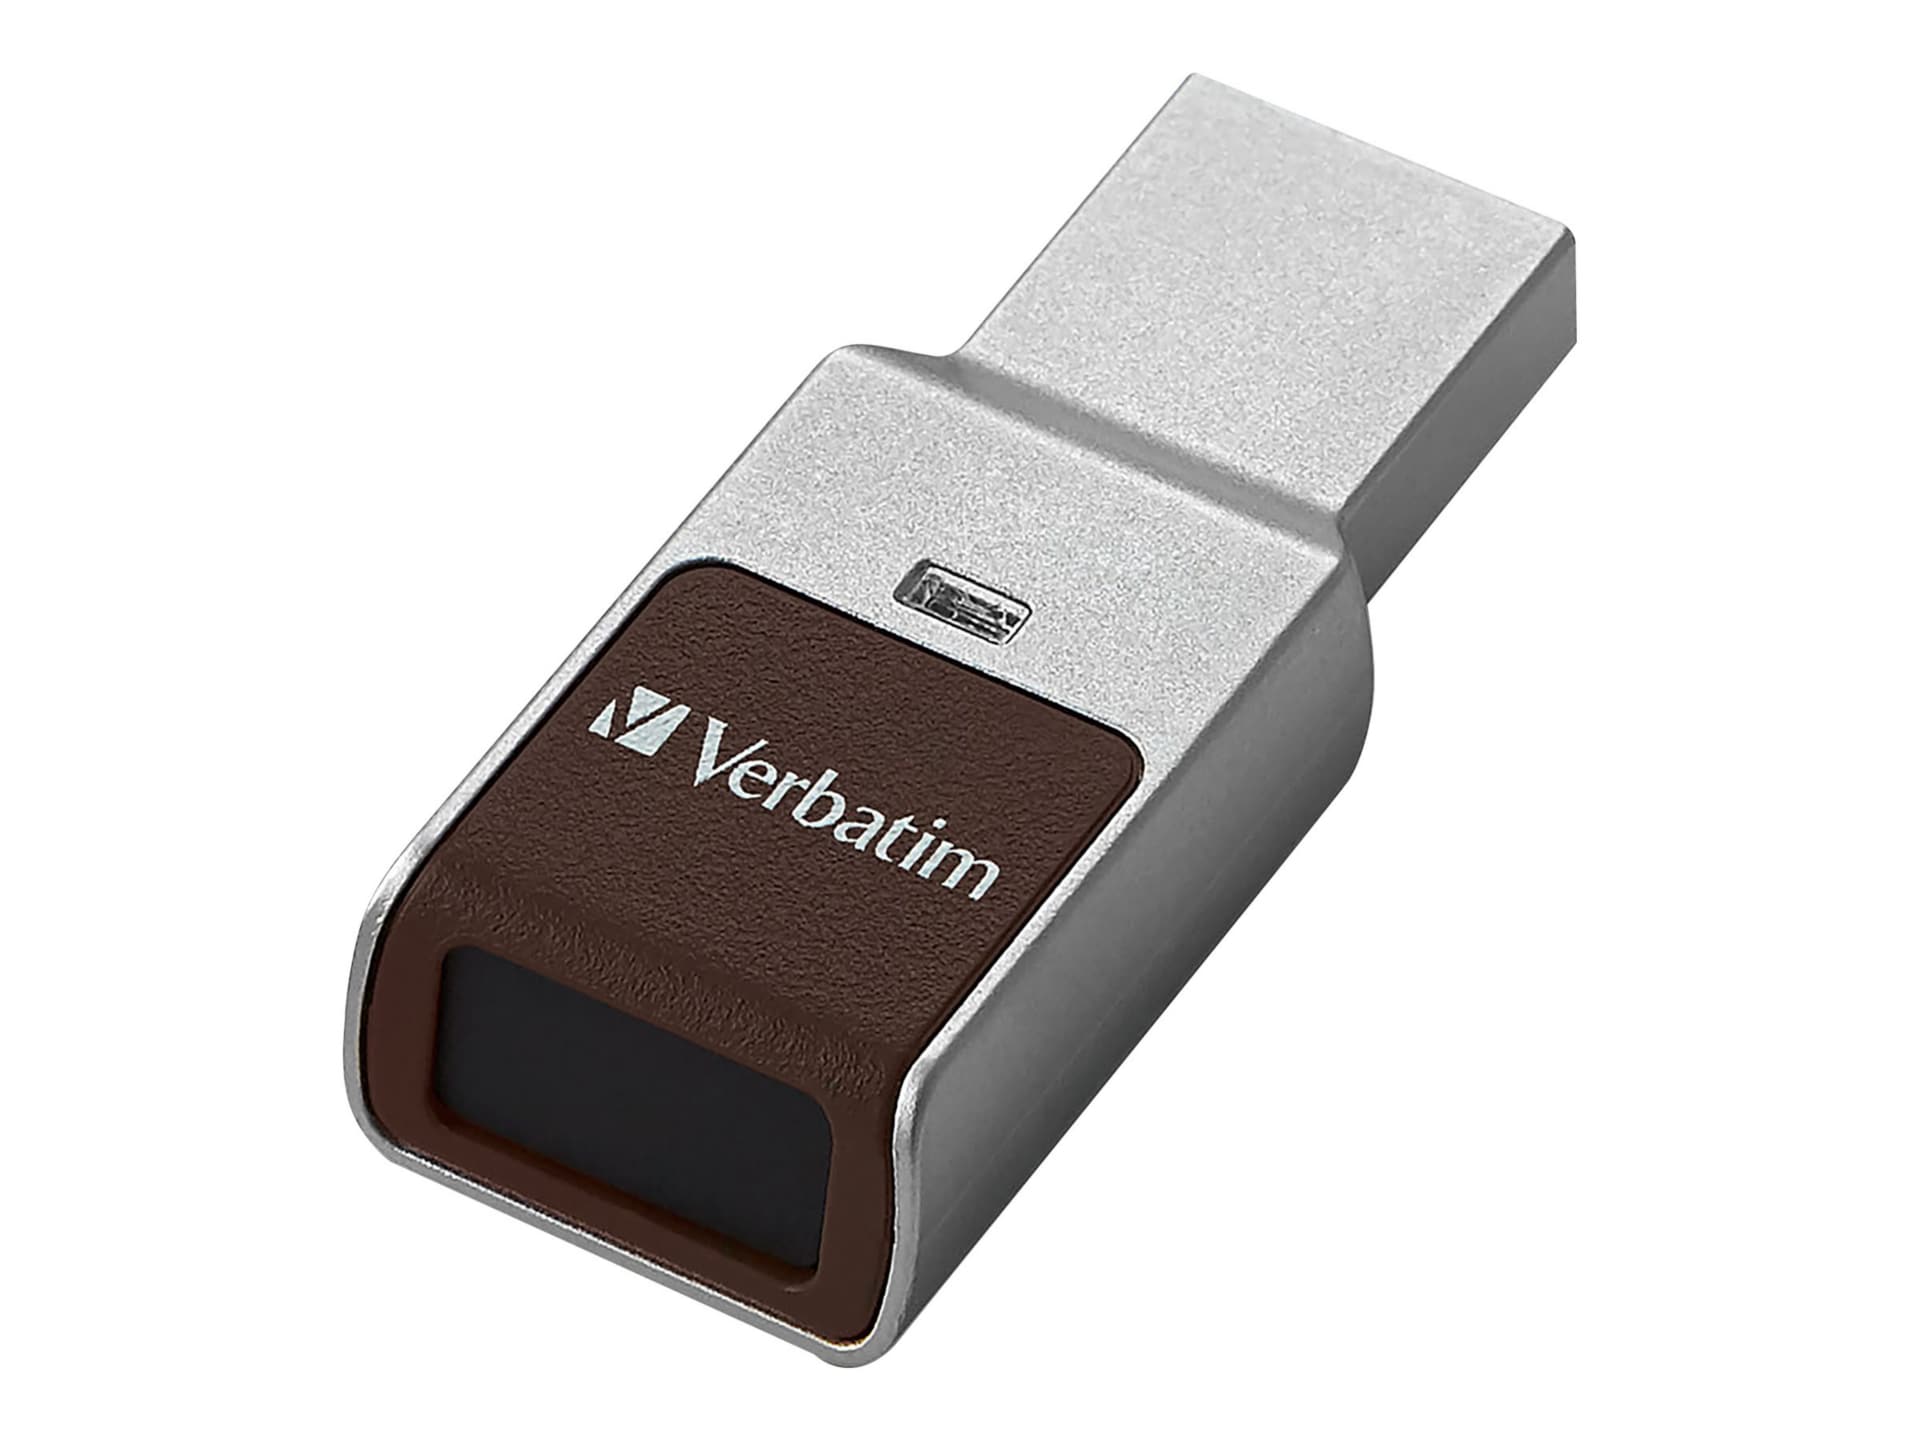 Thumb Drive vs Flash Drive: What's the Difference, Which One Is